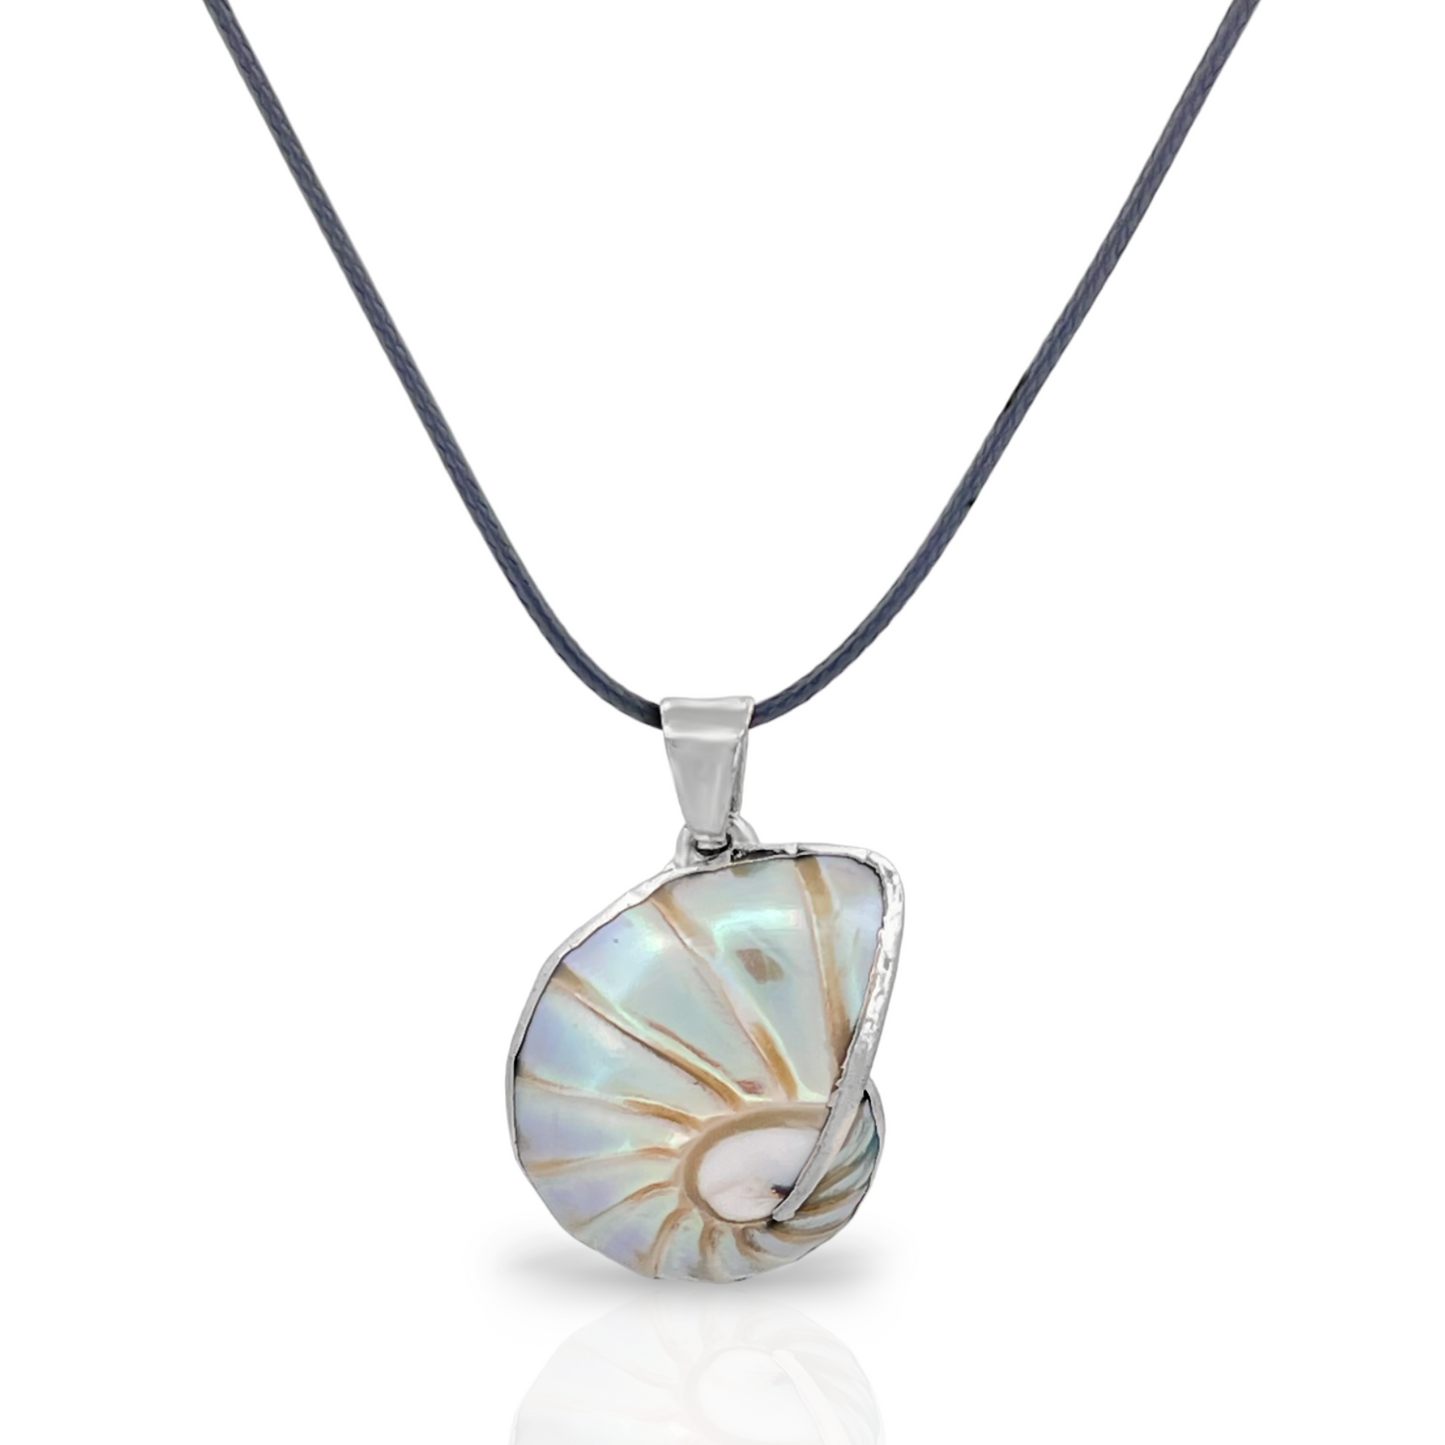 Cream Mother of Pearl Nautilus Shell Pendant Necklace